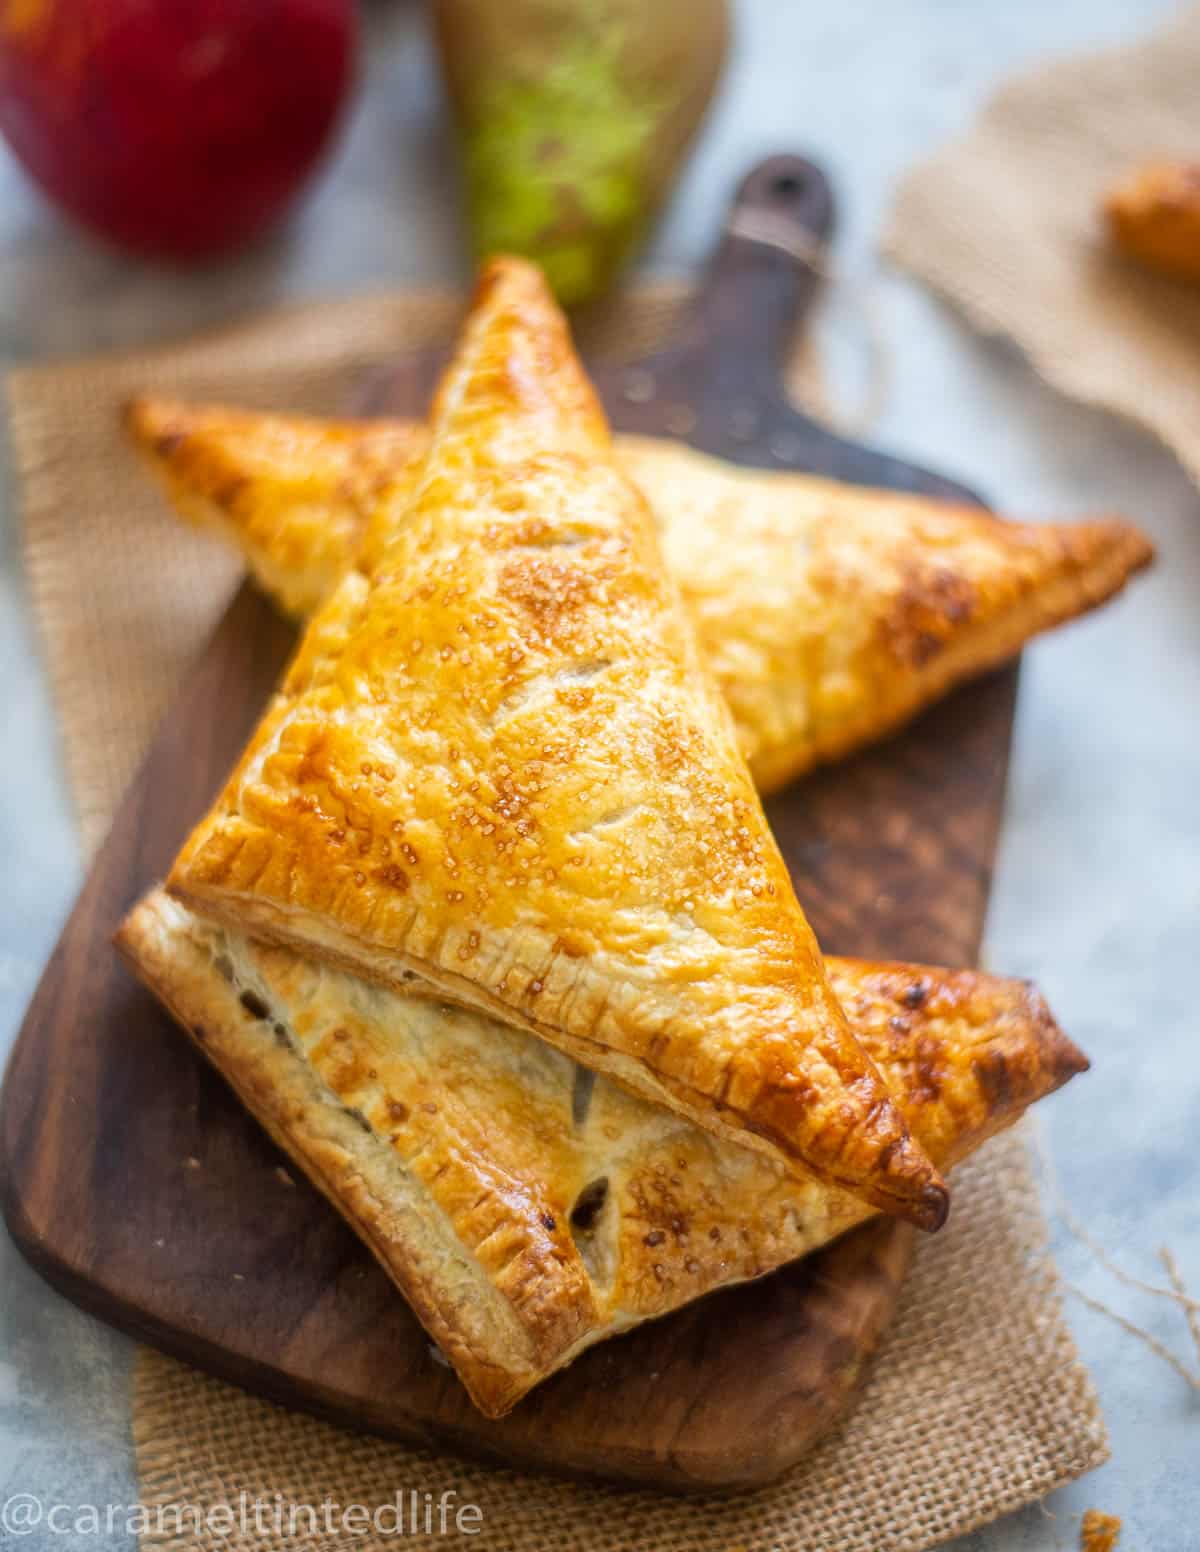 Pear adn dapple turnovers stacked on a wooden board